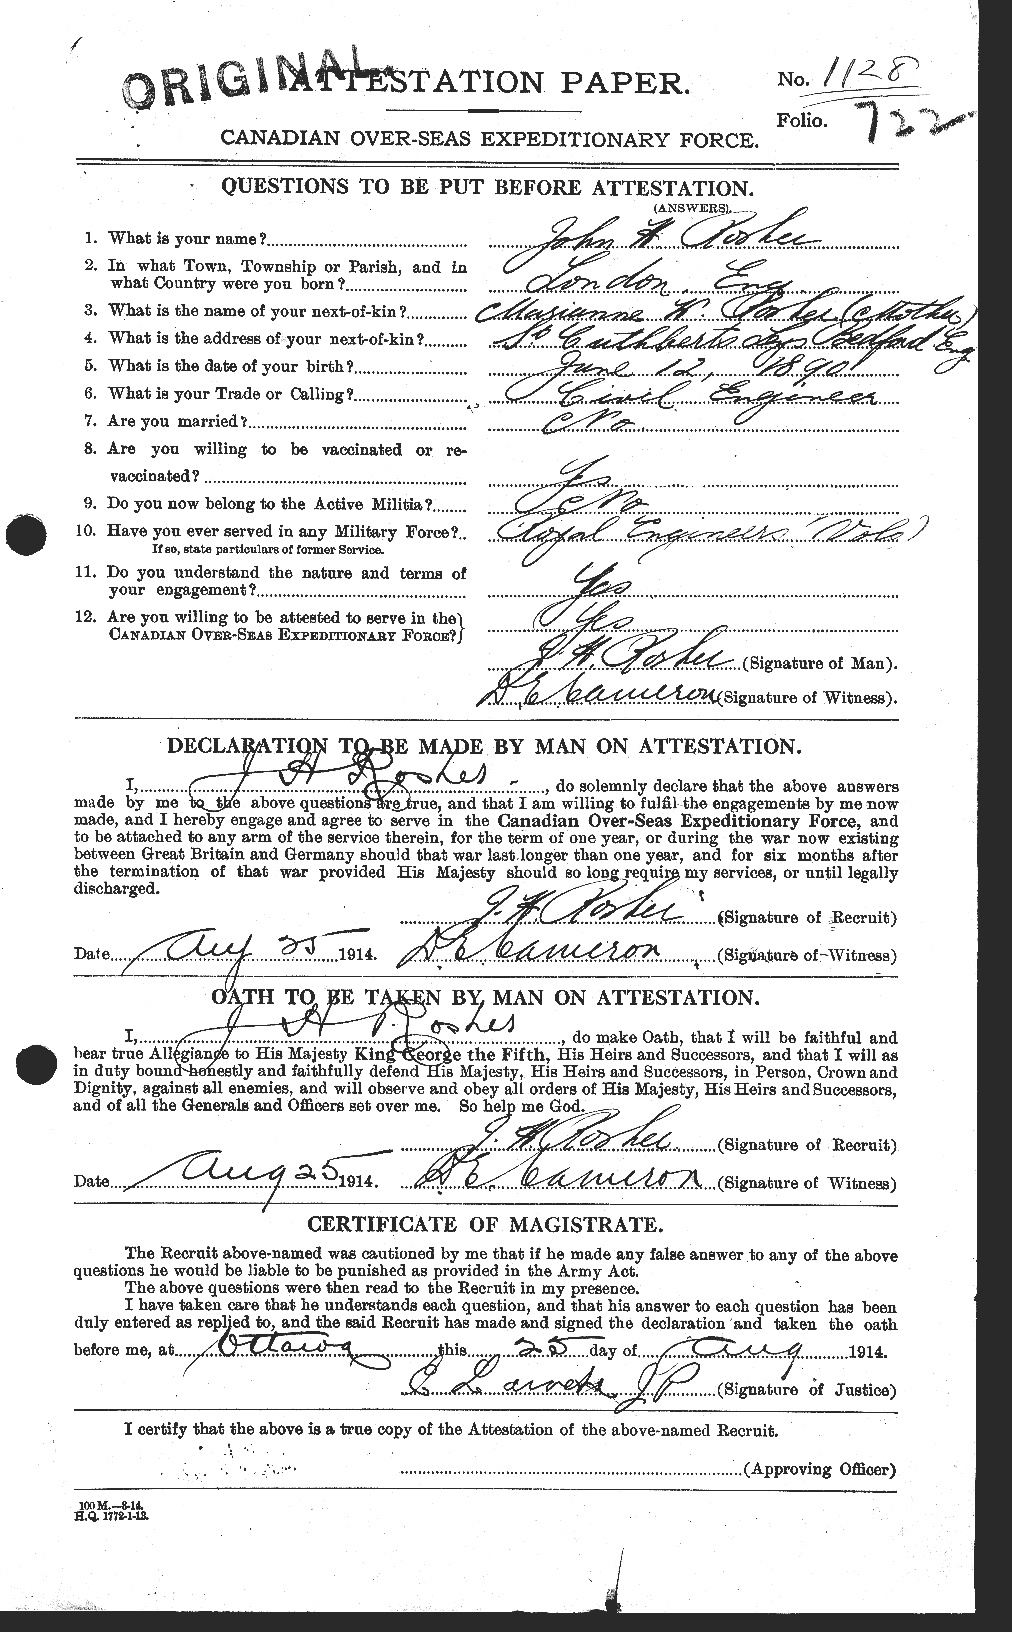 Personnel Records of the First World War - CEF 611298a